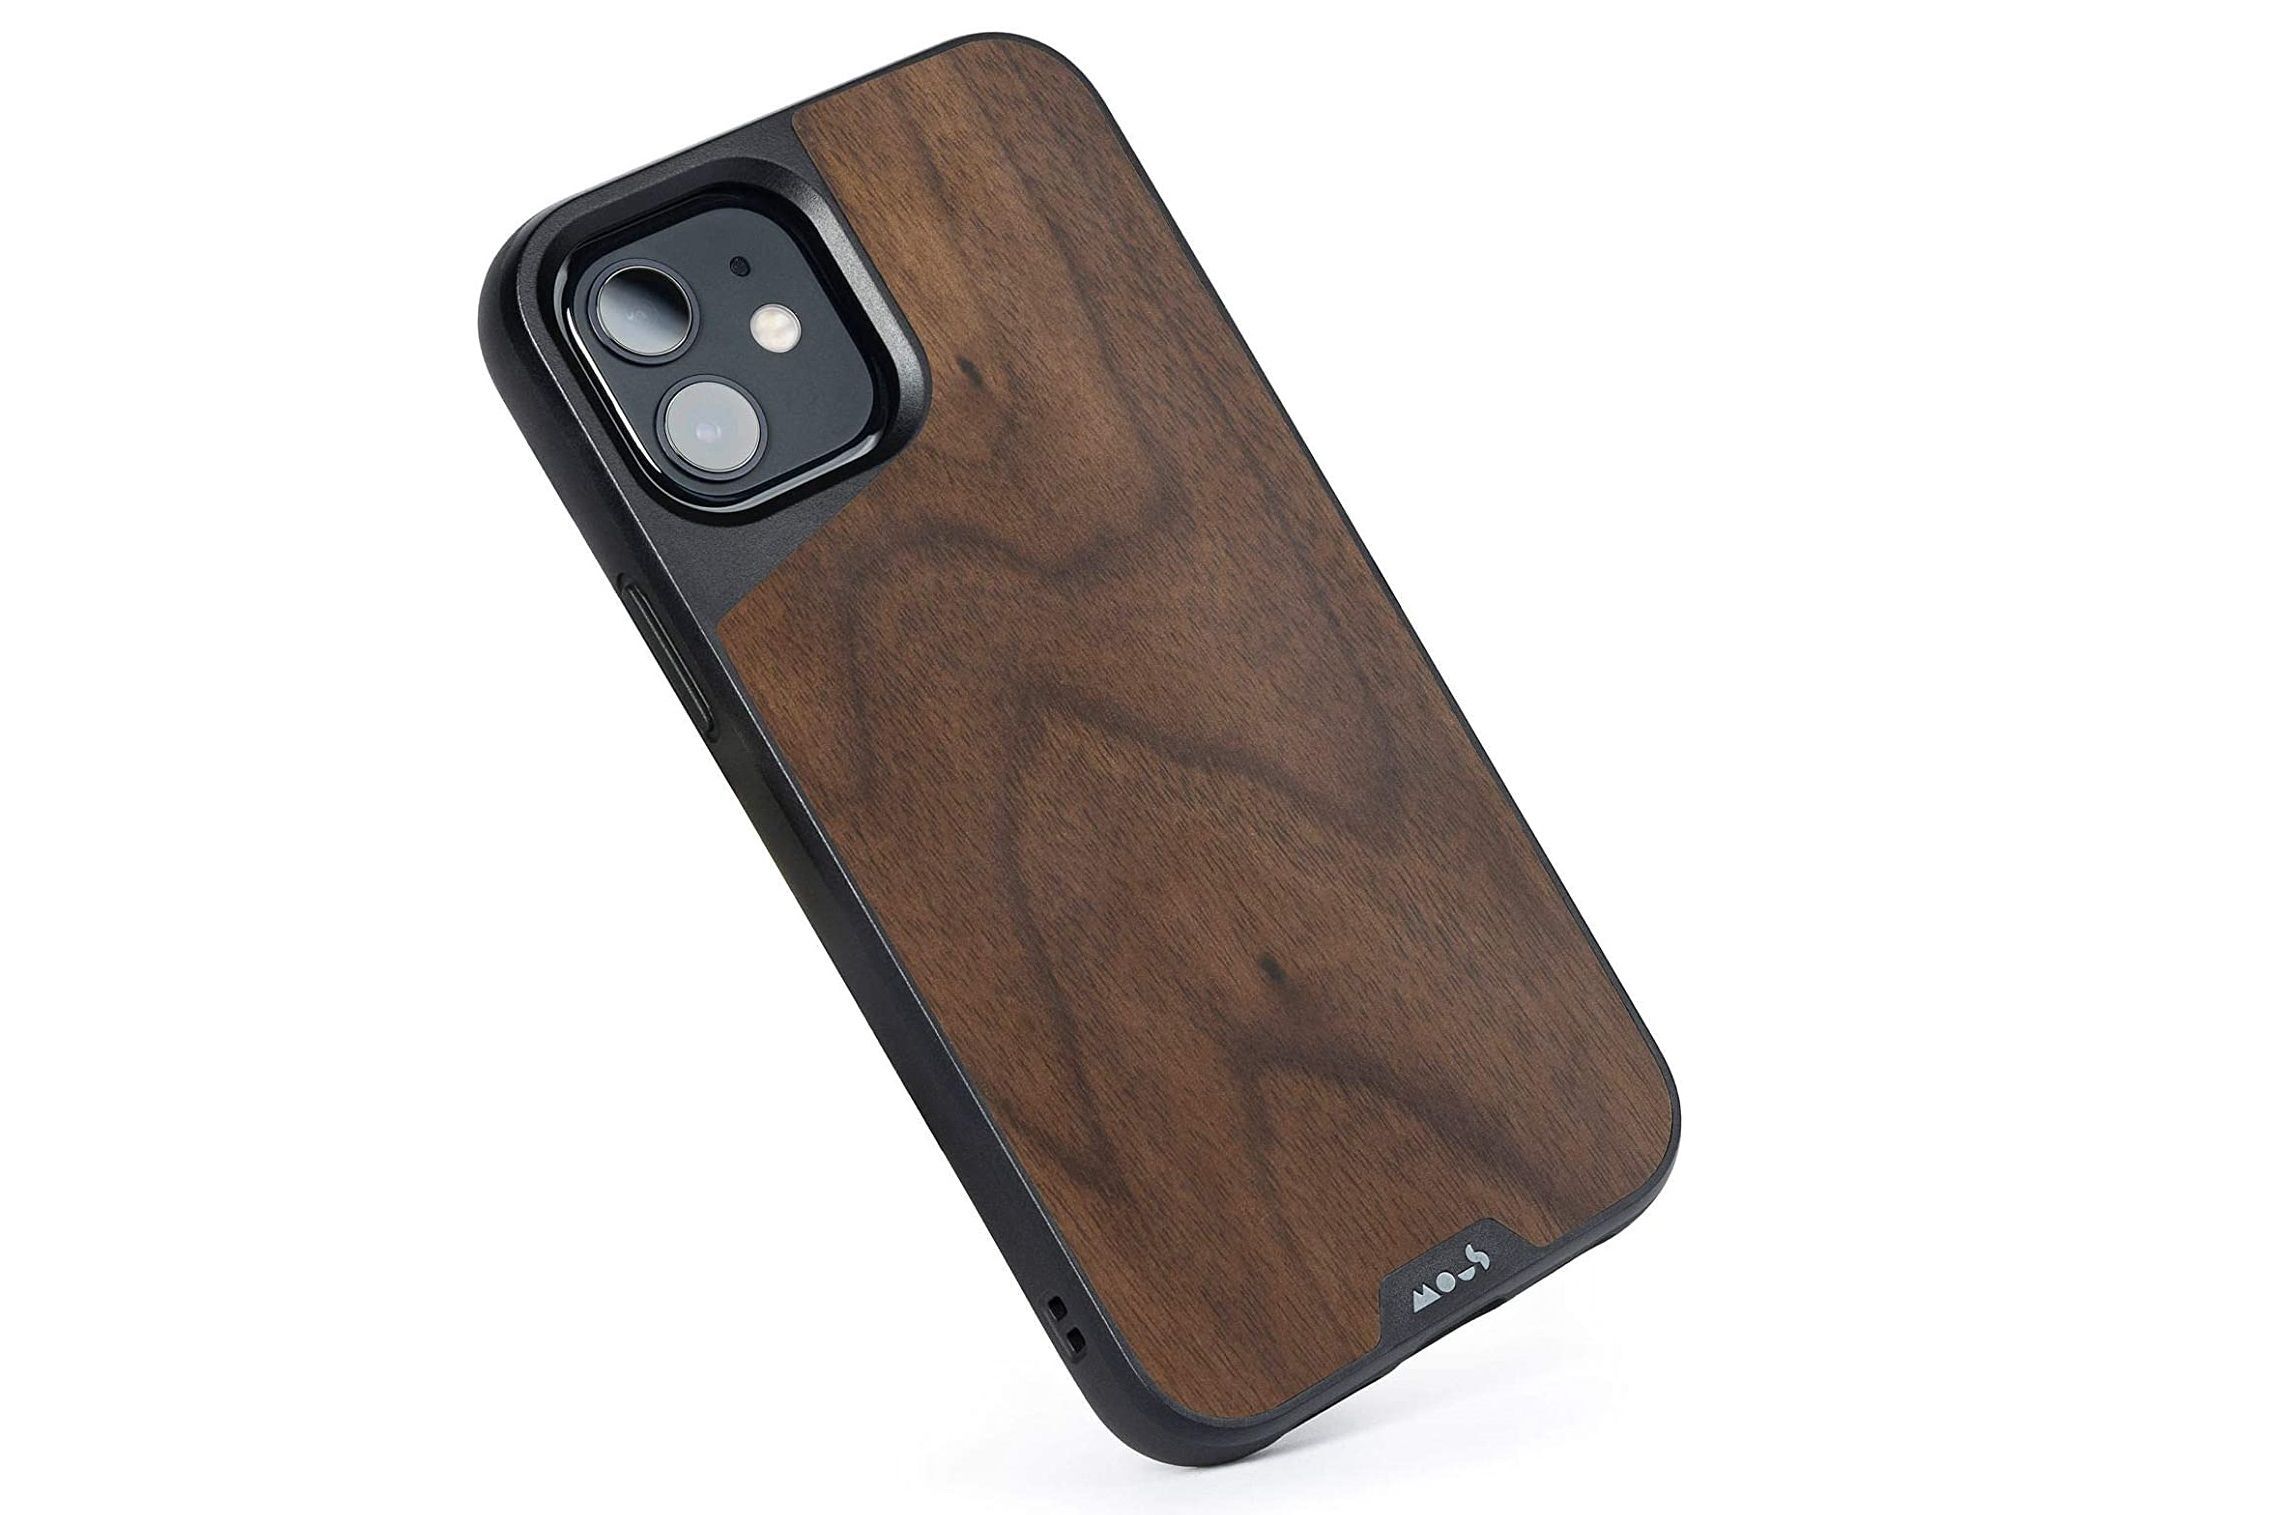 Mous Limitless 3.0 iPhone 12 mini case - The best iPhone 12 mini cases you can get - updated July 2022